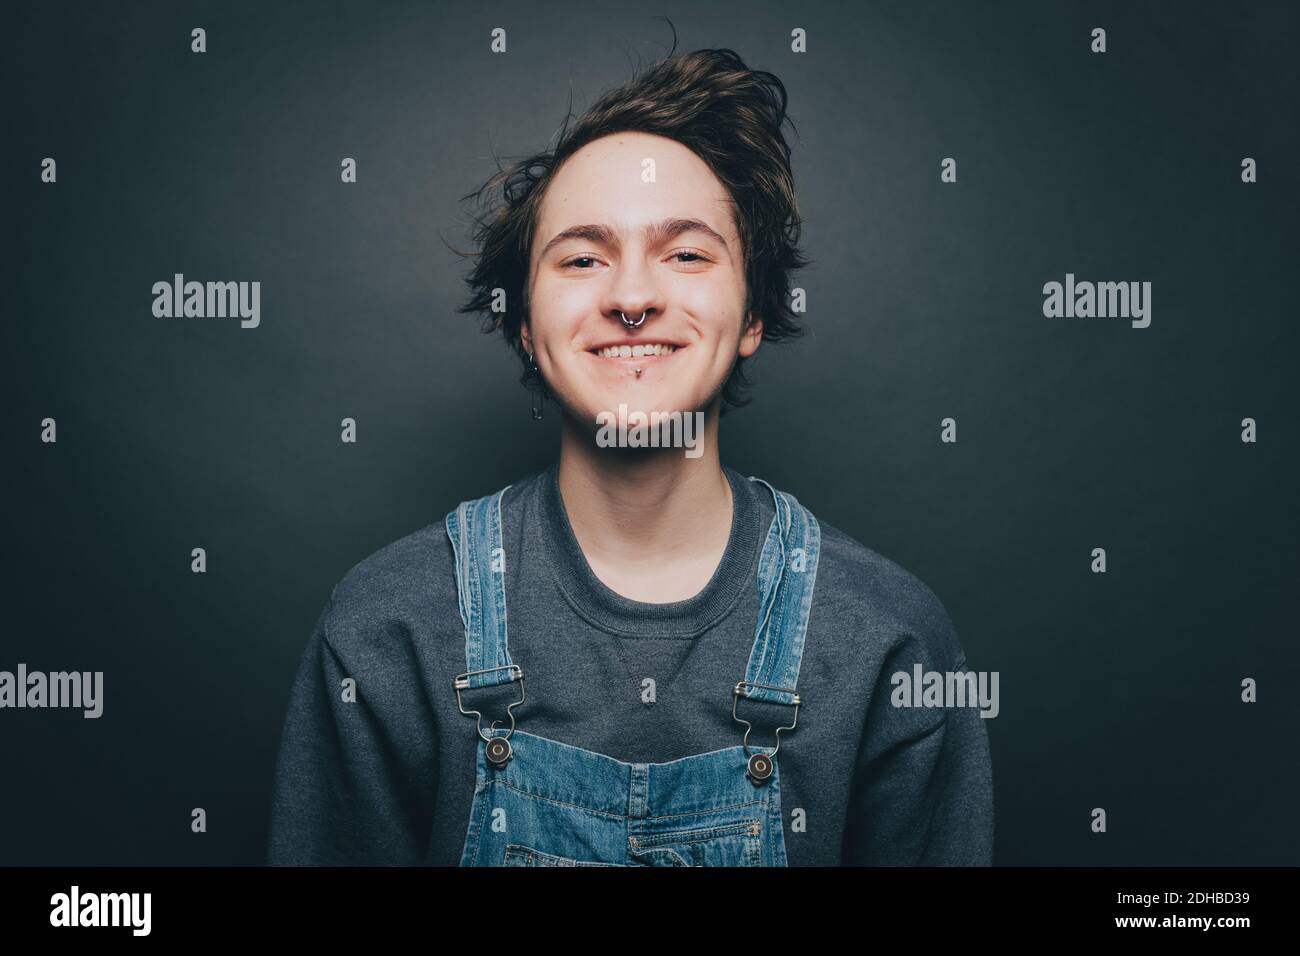 Portrait of smiling young man wearing denim overalls over gray background Stock Photo